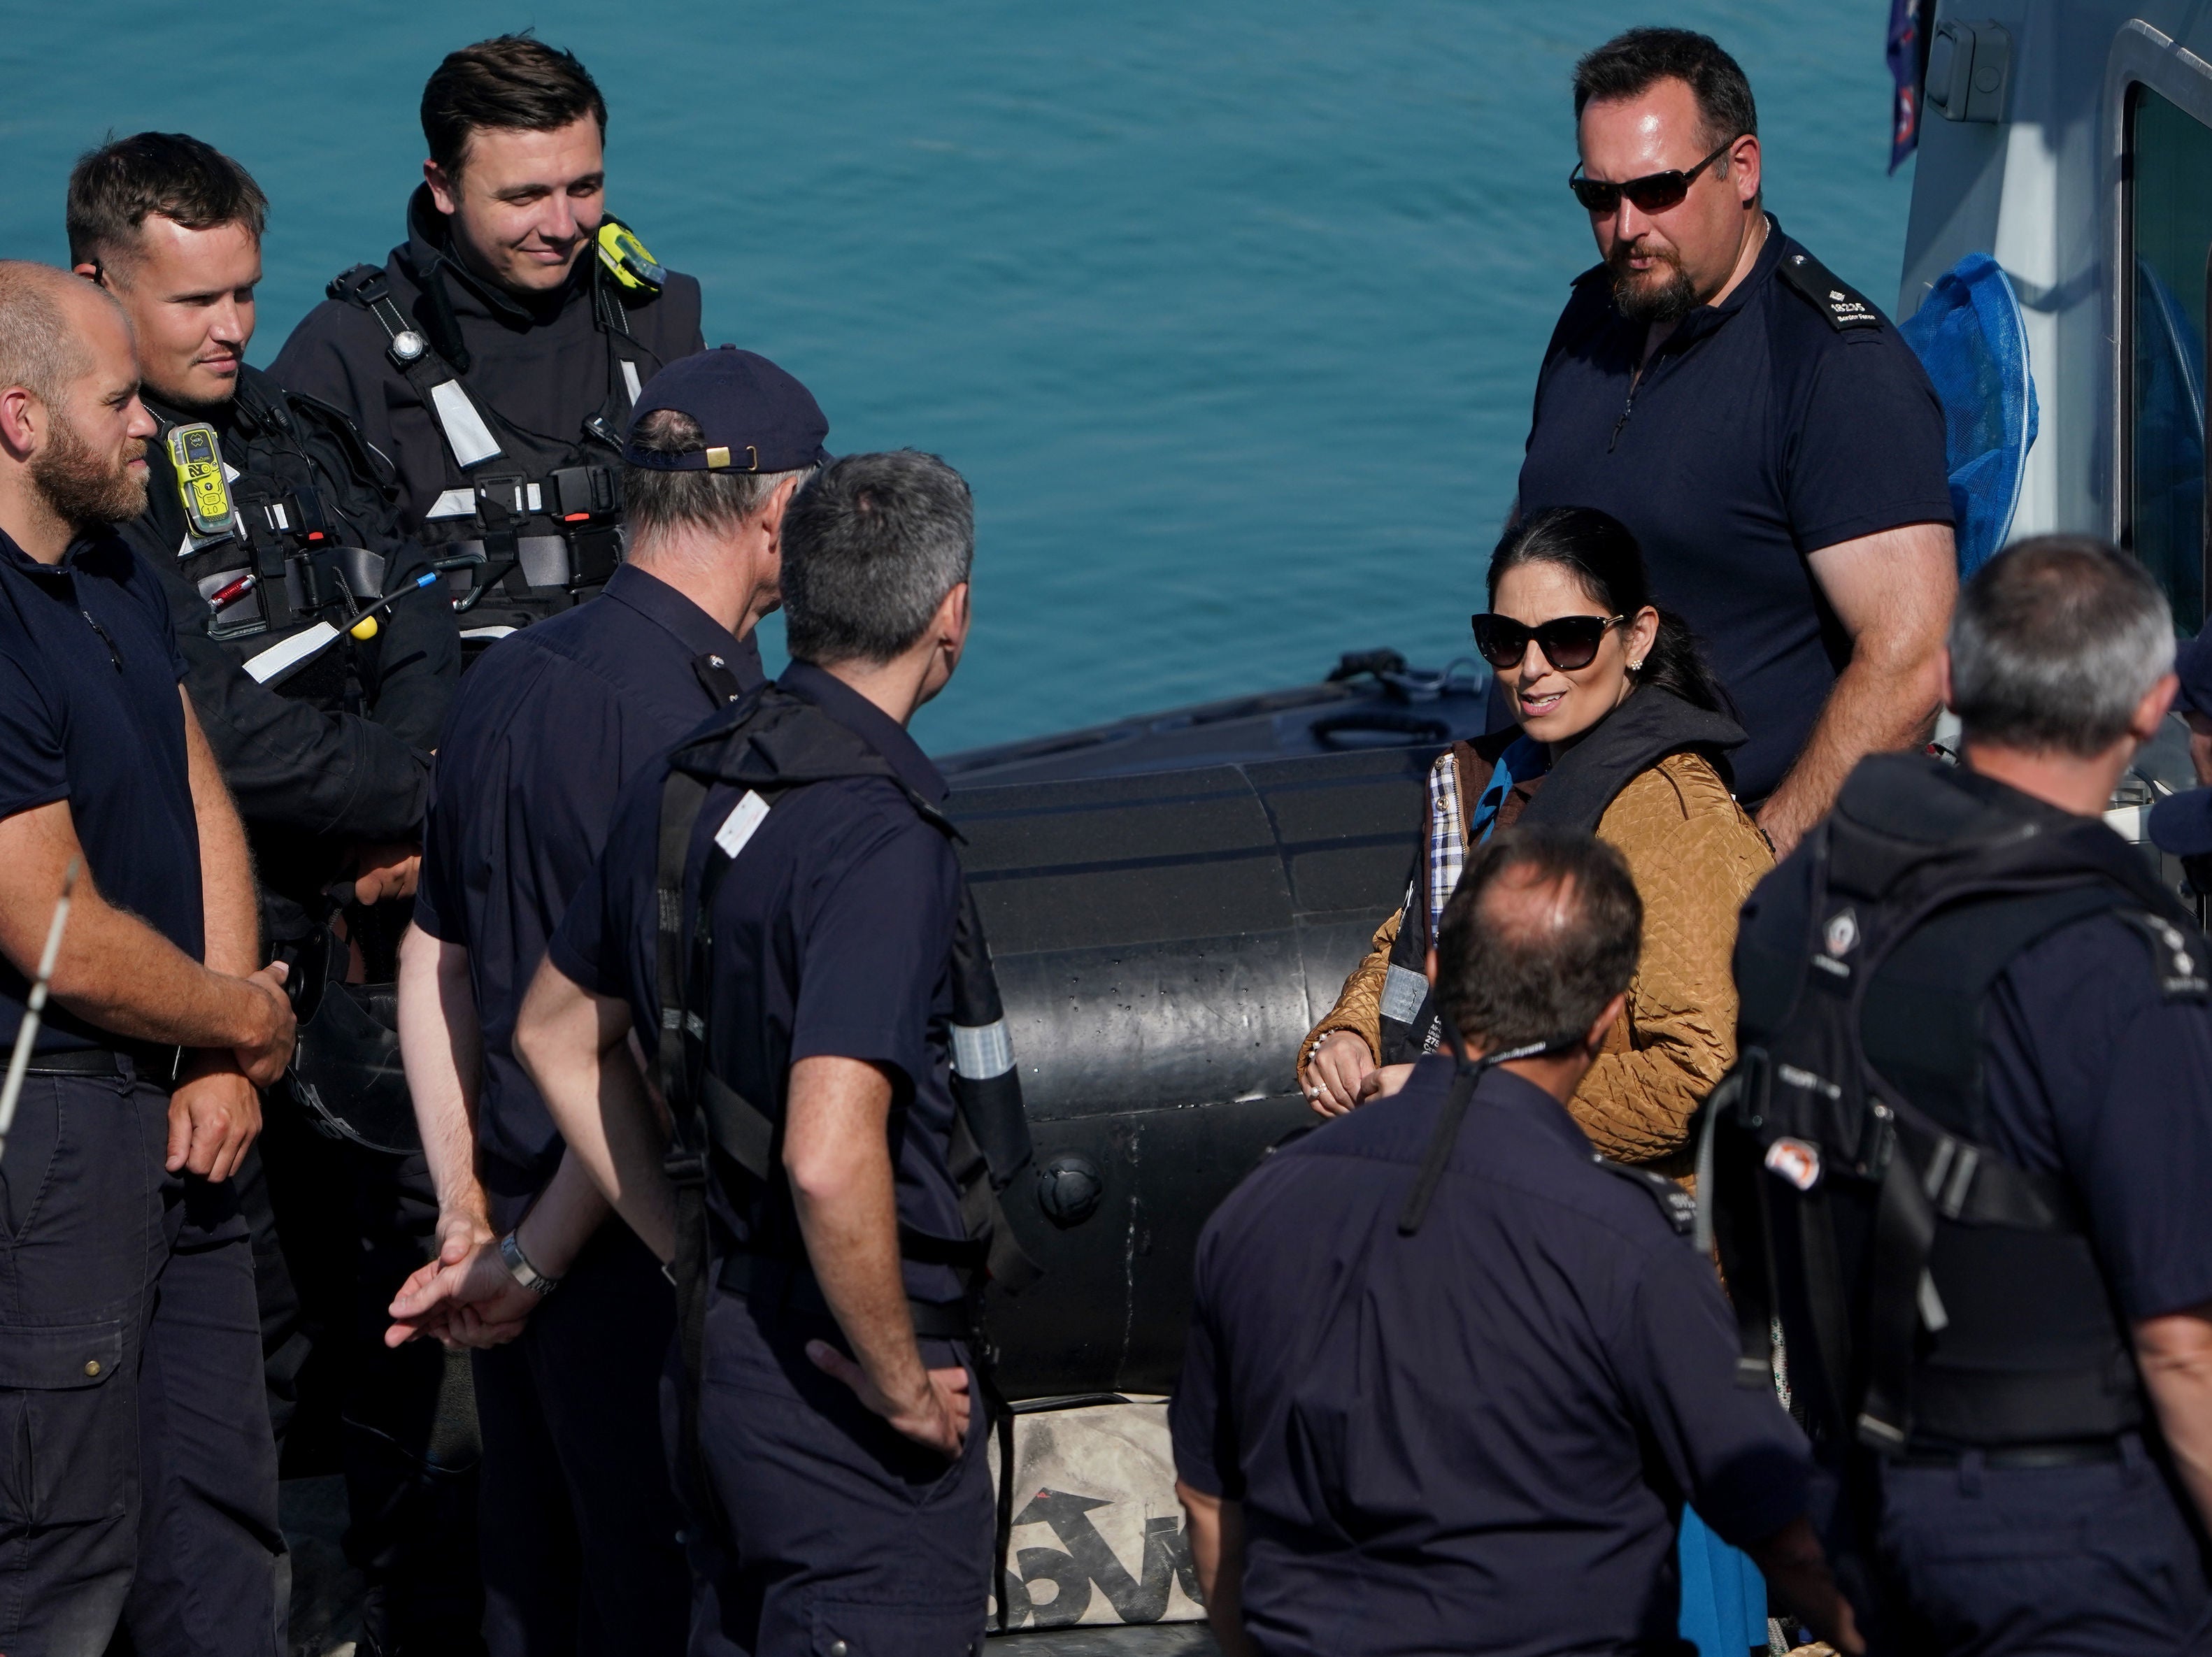 Home Secretary Priti Patel during a visit to the Border Force facility in Dover